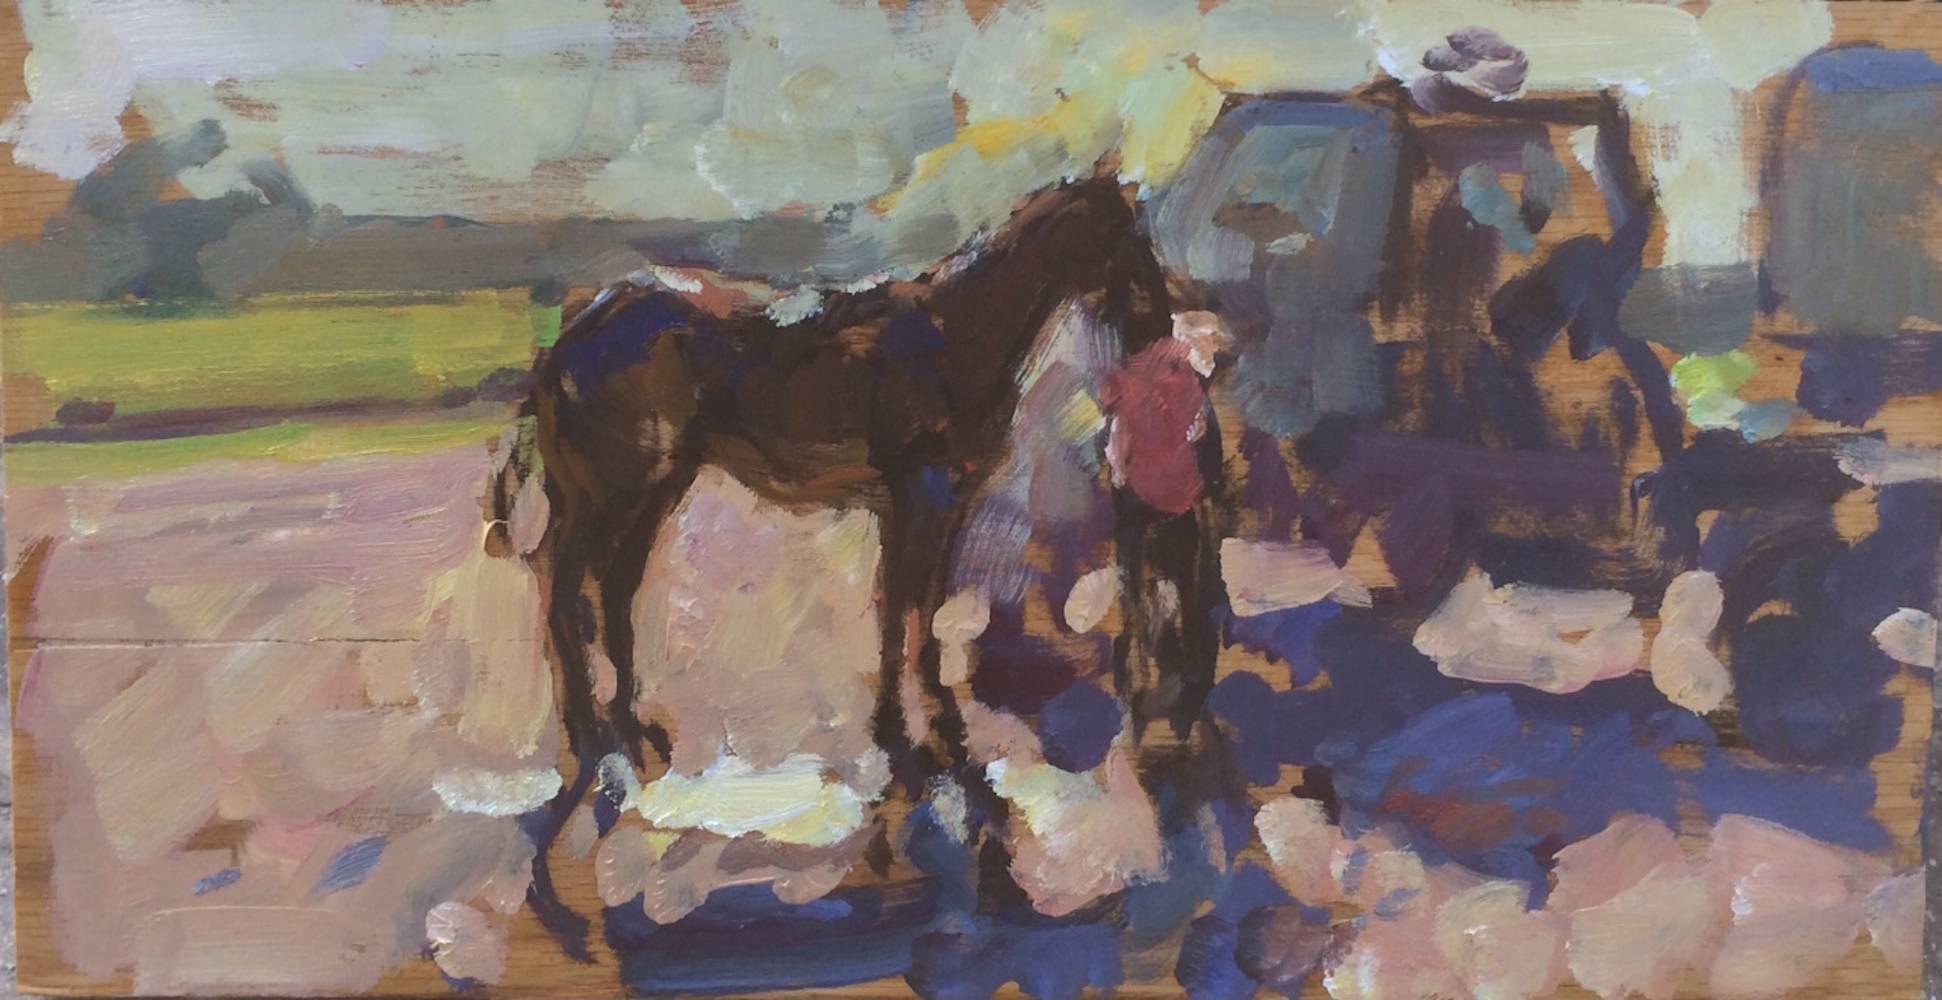 "Pony and Groom" 2014 oil painting on wood, impressionist sketch, equestrian  - Art by Ben Fenske